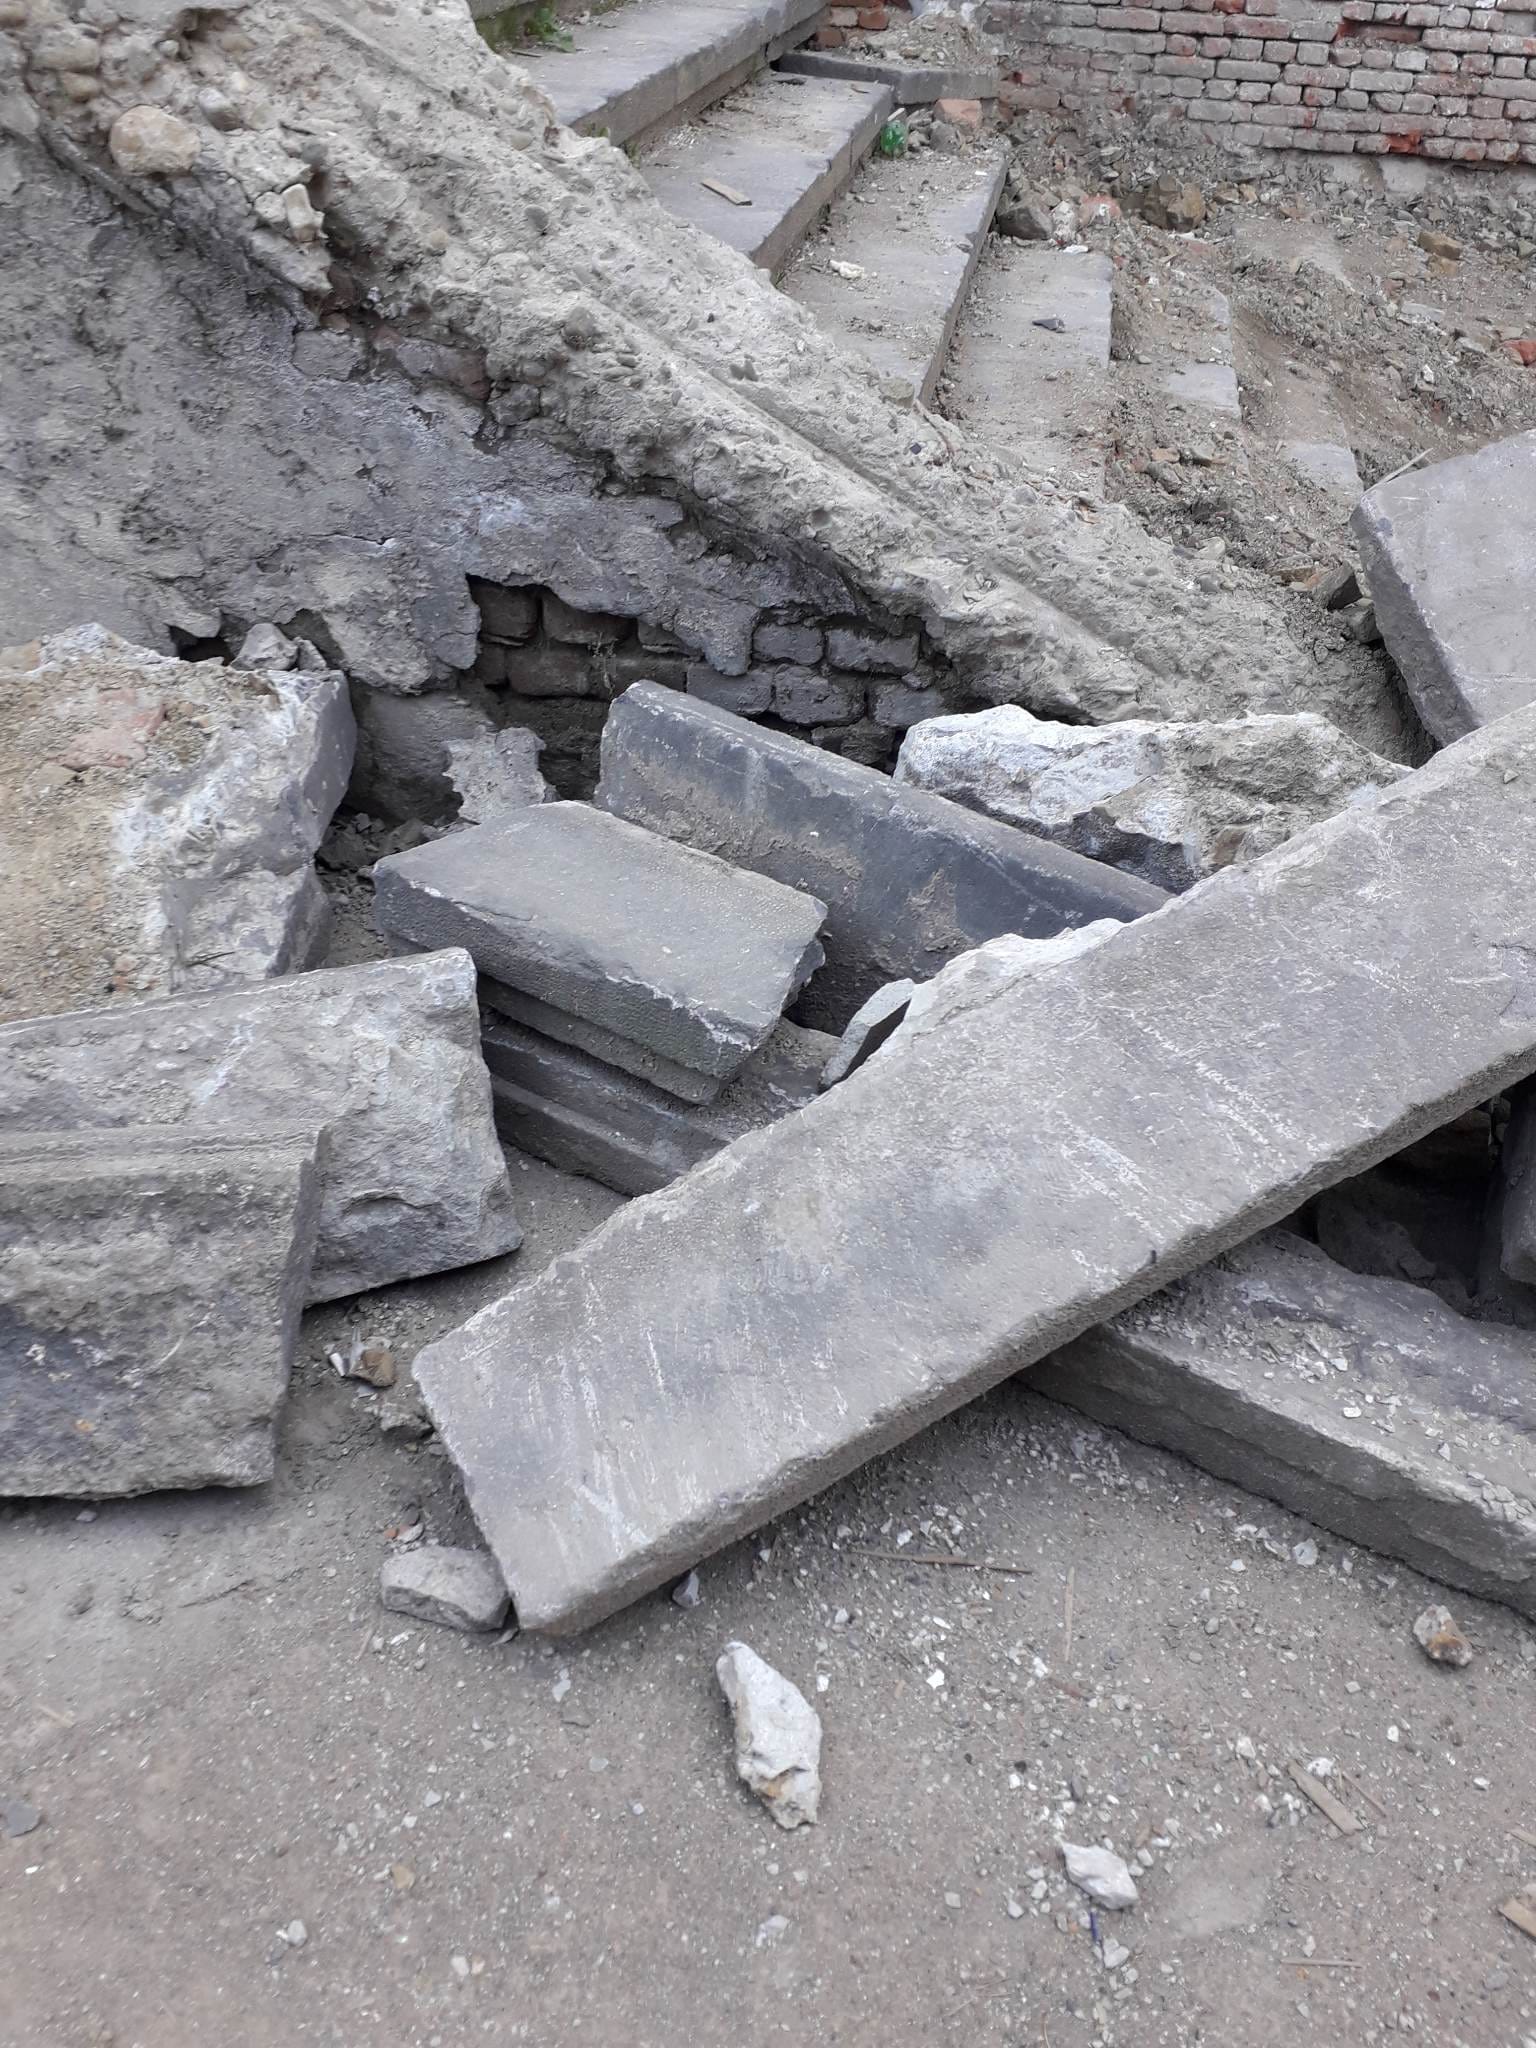 Remnants of Armenian gravestones discovered during construction work in Tbilisi 